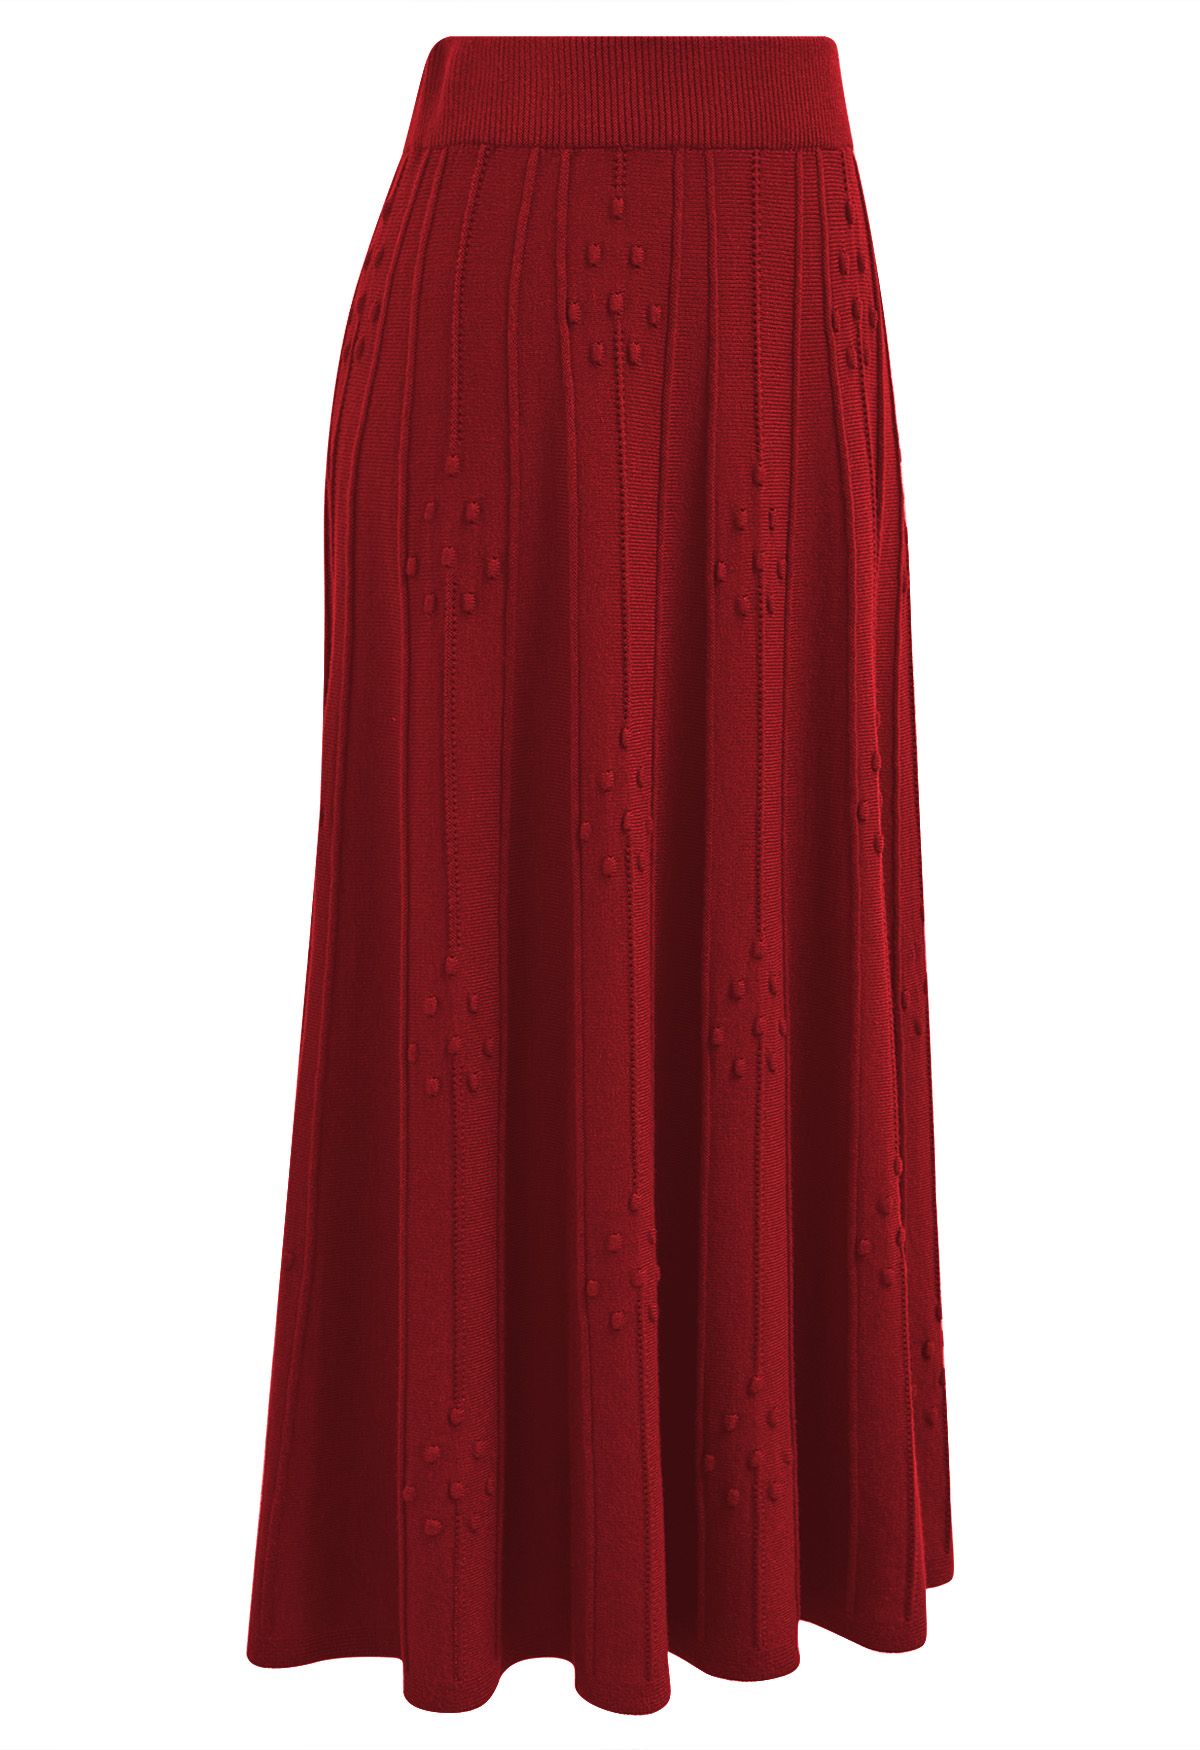 Embossed Dots Seam Knit Midi Skirt in Red - Retro, Indie and Unique Fashion